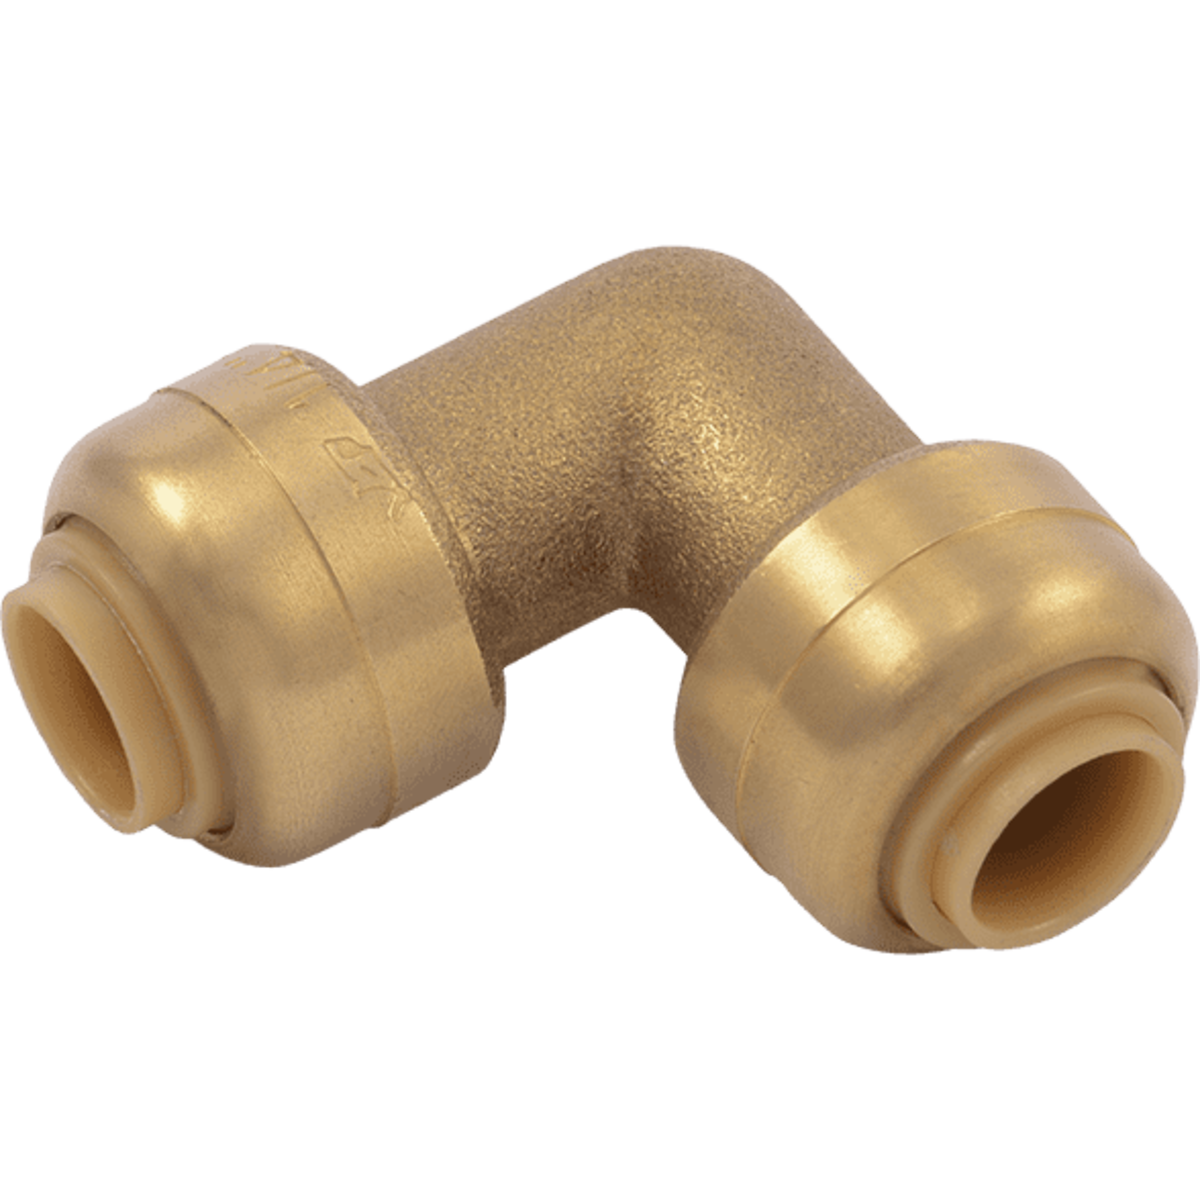 28mm Pipe Fitting Plumber 68:12 Pack Of 5 PRESS COPPER GAS 90° ELBOW 